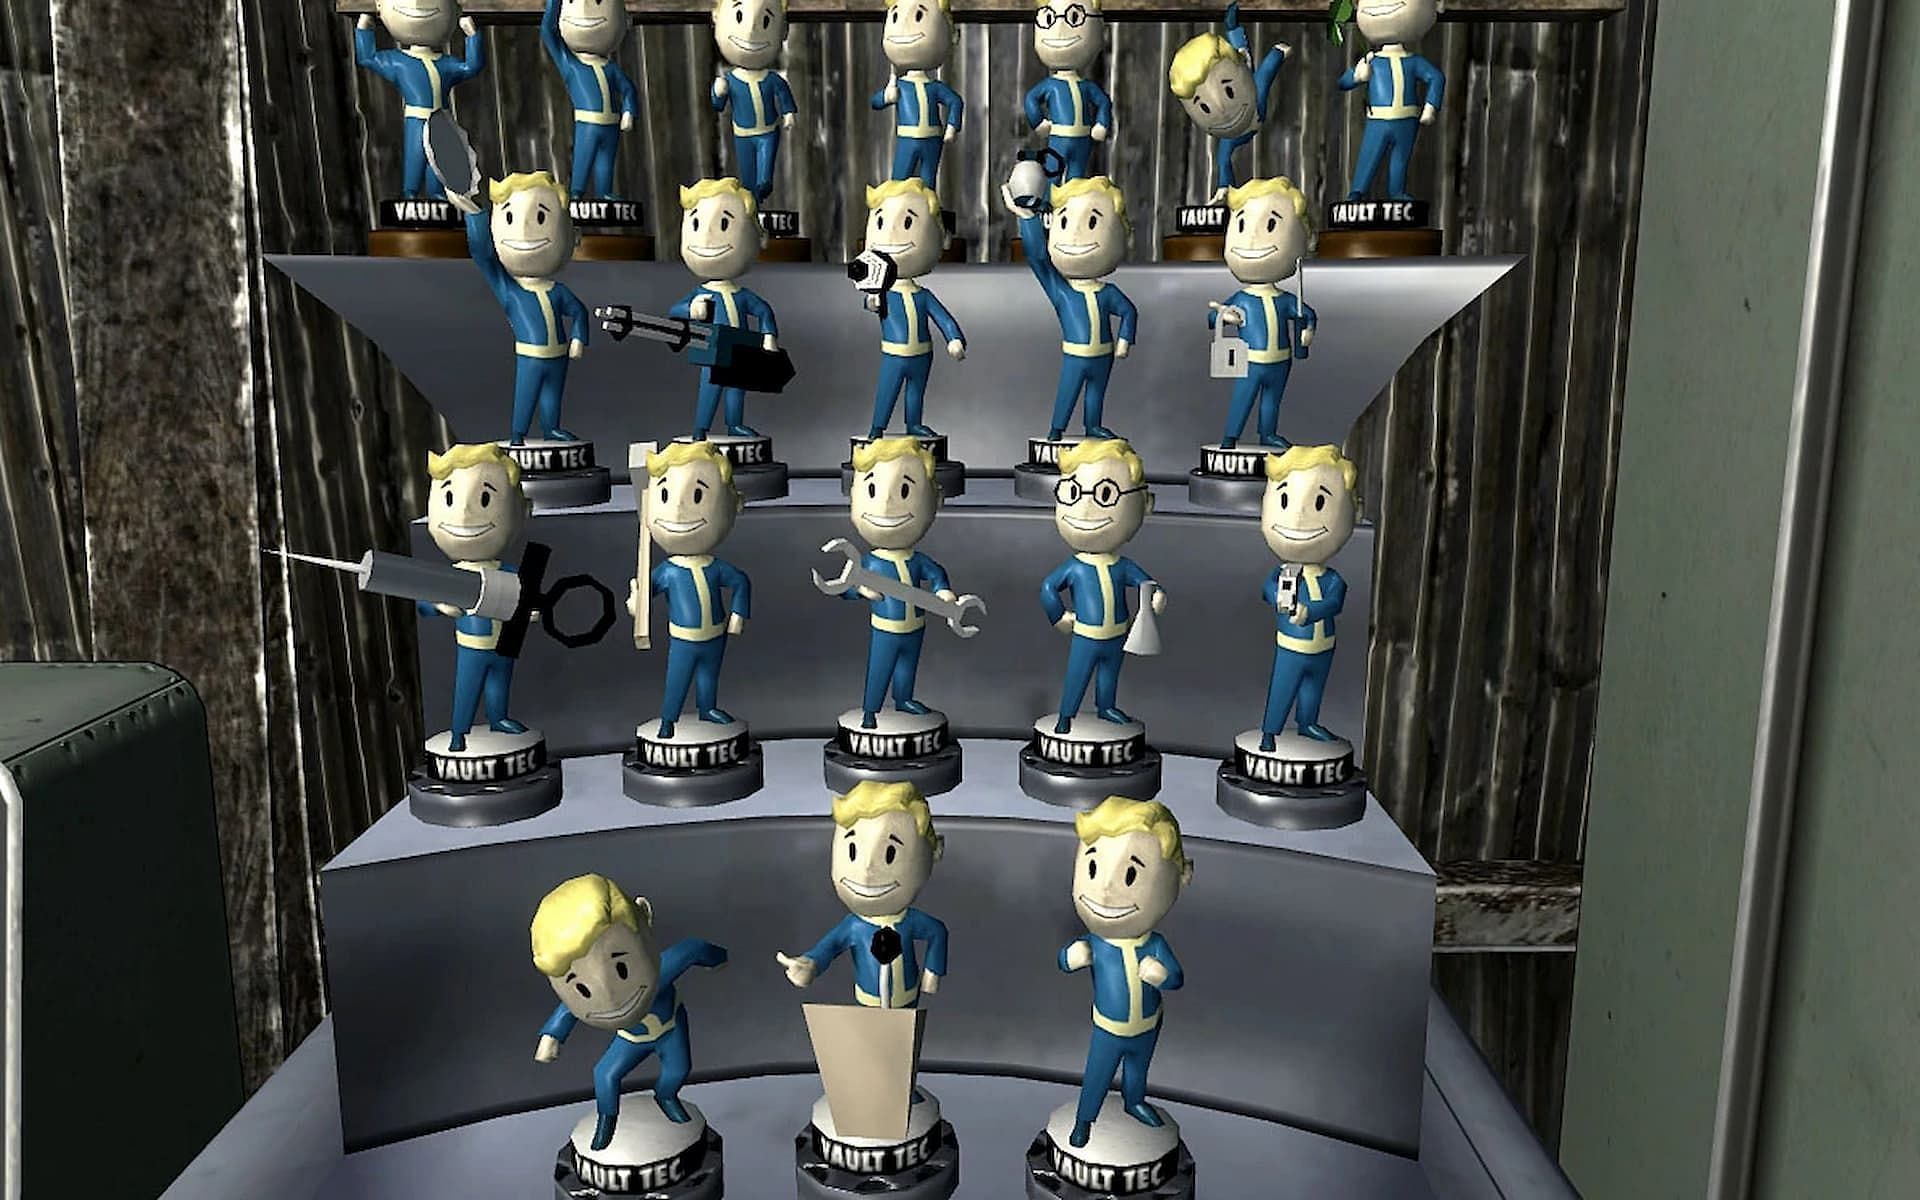 Fallout 76 has plenty of Bobbleheads for players to find (Image via Bethesda)